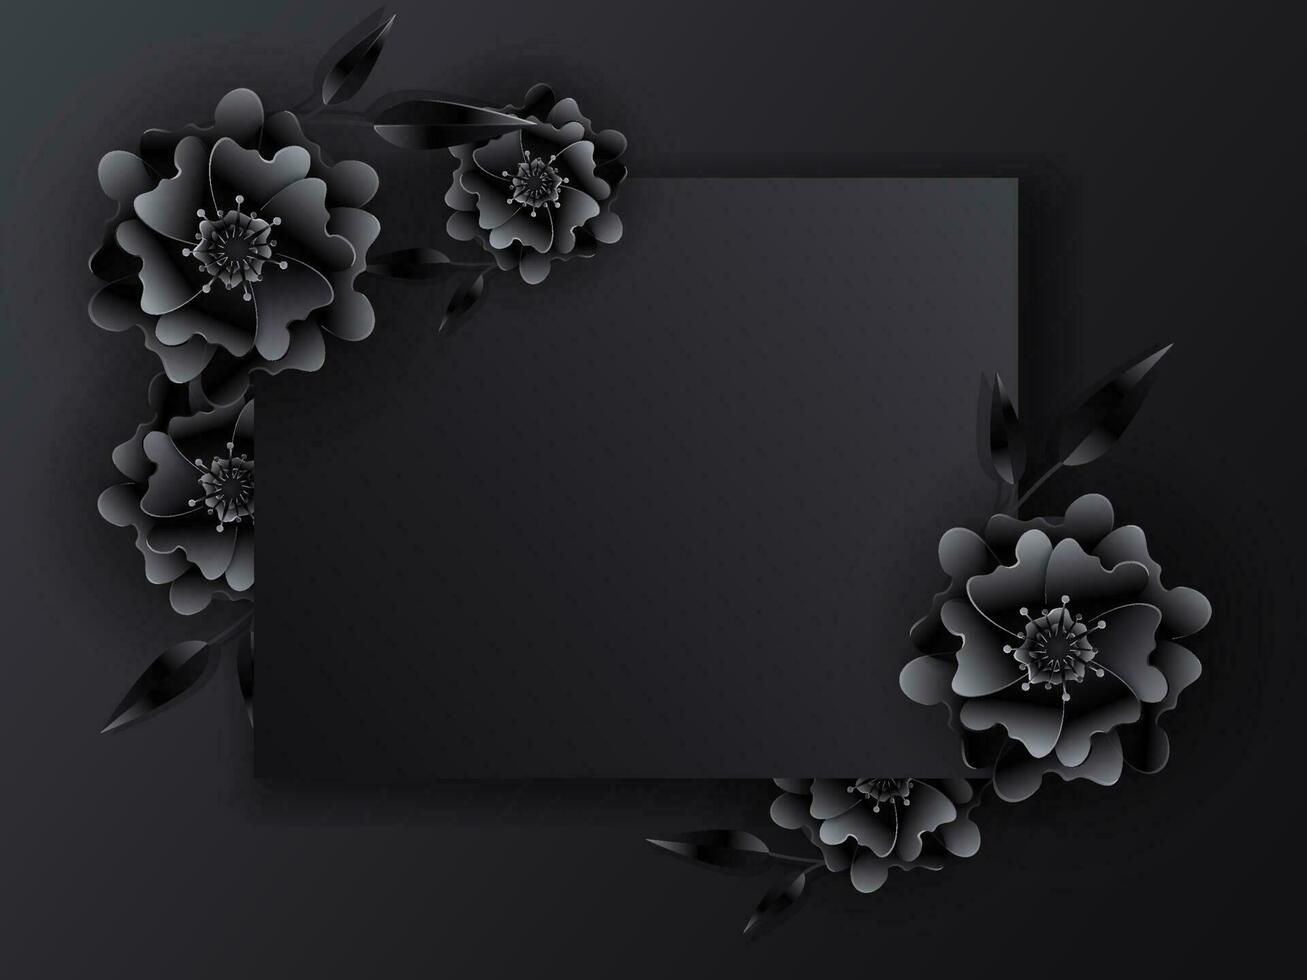 Paper Cut Flowers and Leaves Decorated on Black Background with Space for message. vector